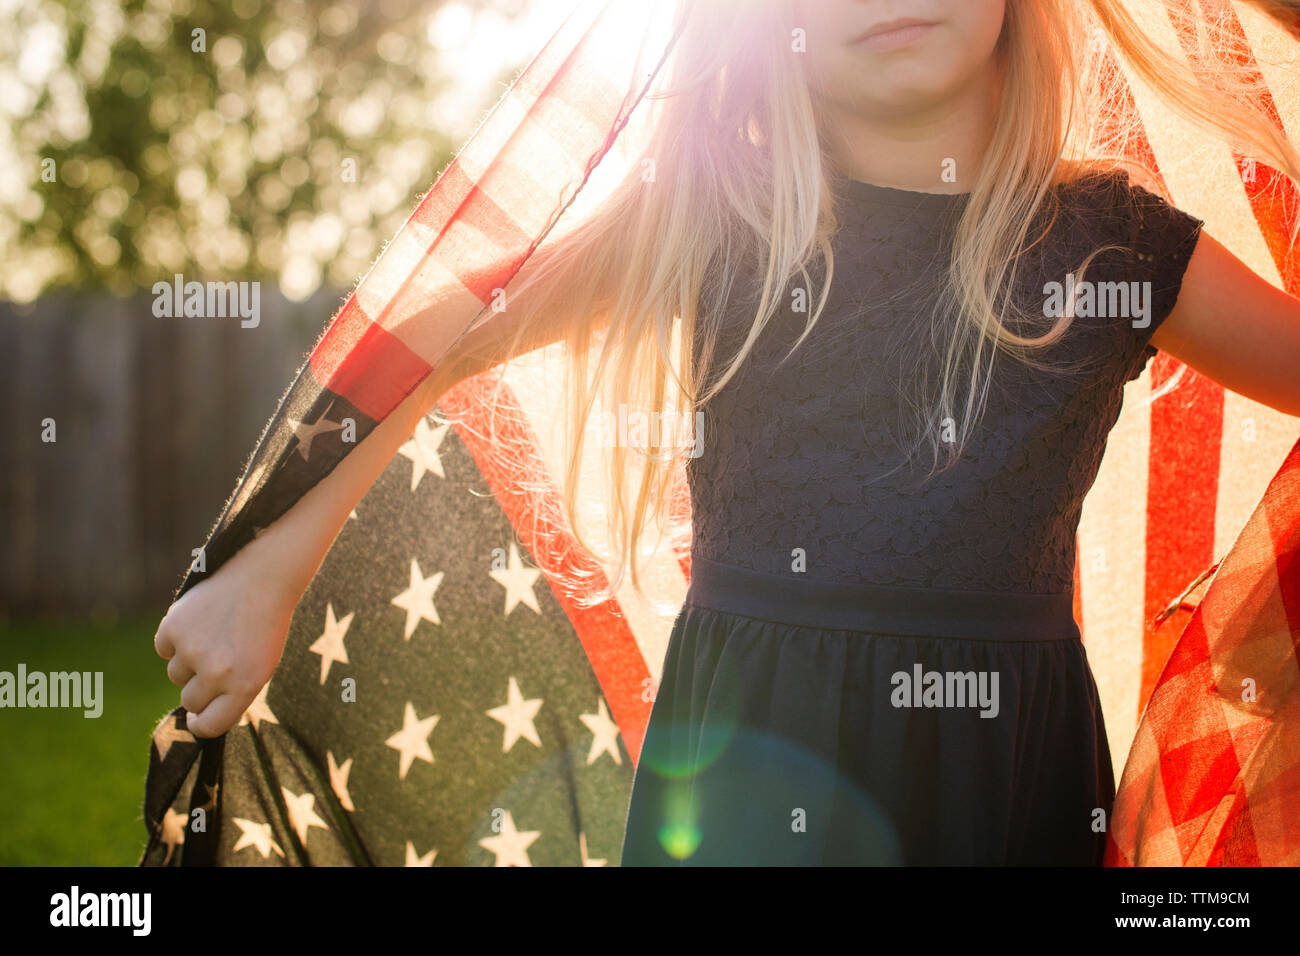 Midsection of girl with American flag in backyard Stock Photo